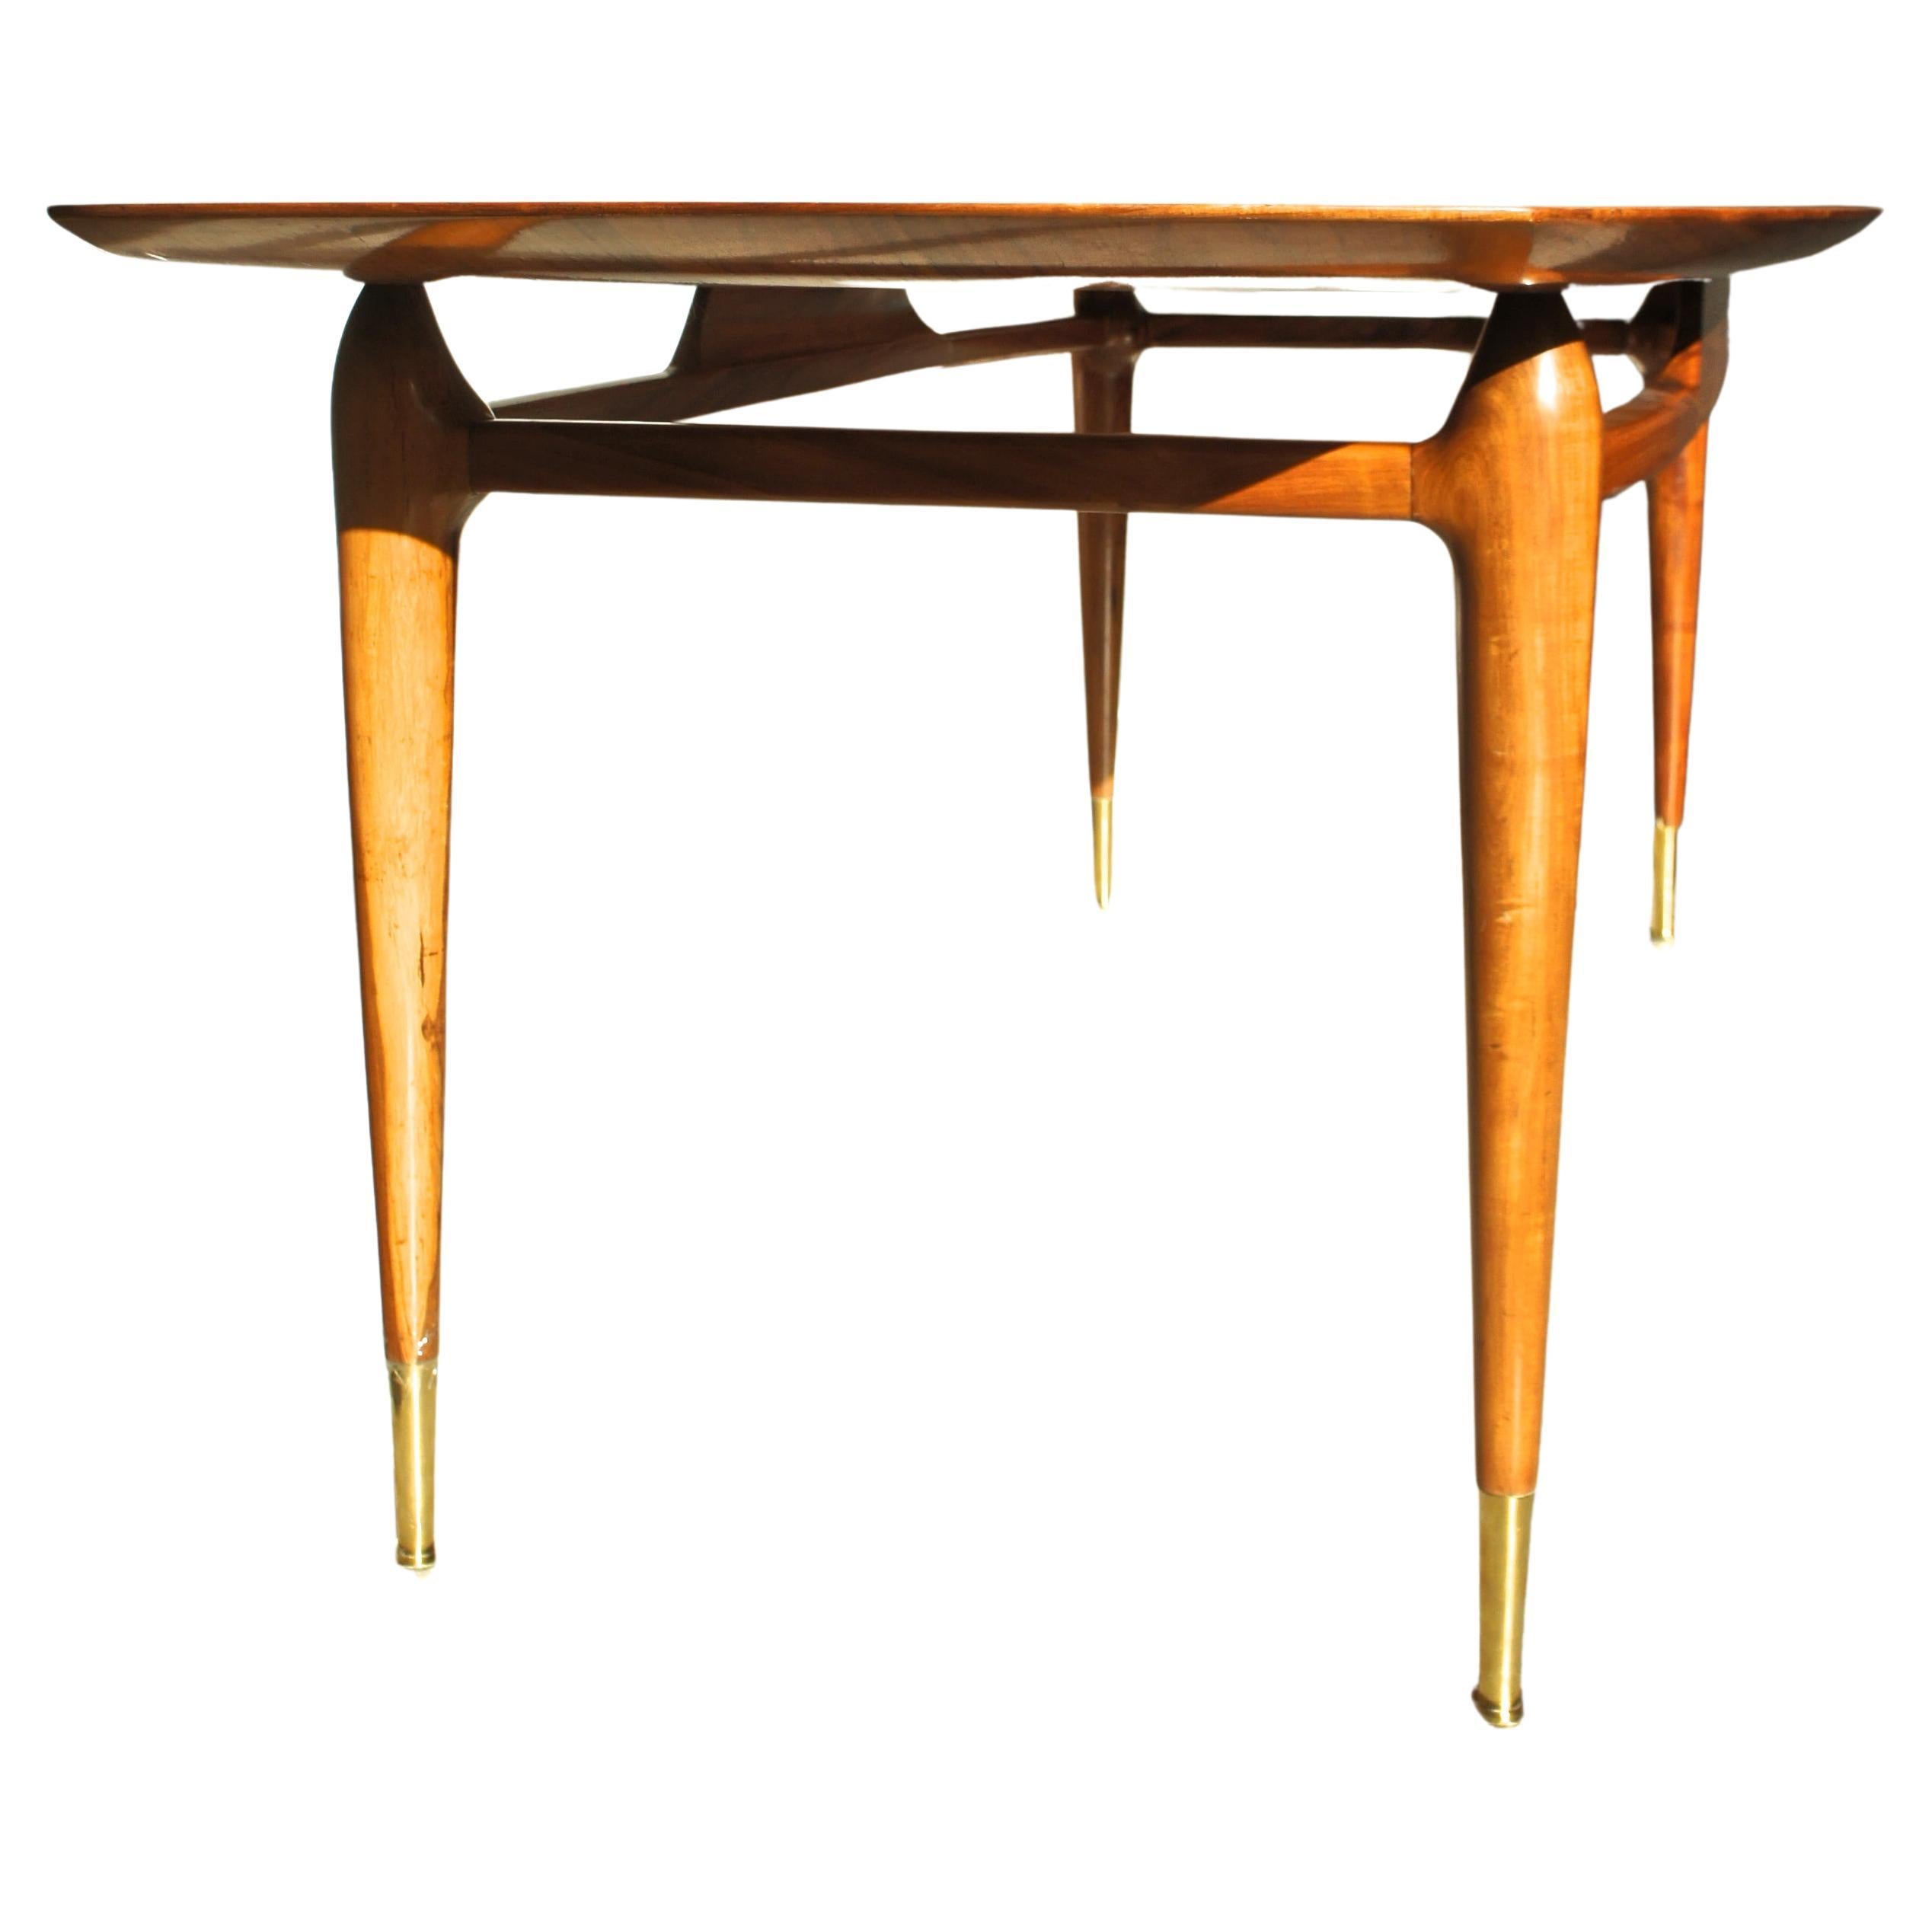 Giuseppe Scapinelli. Mid-Century Modern "Cosmos" Dining Table with Wooden Top